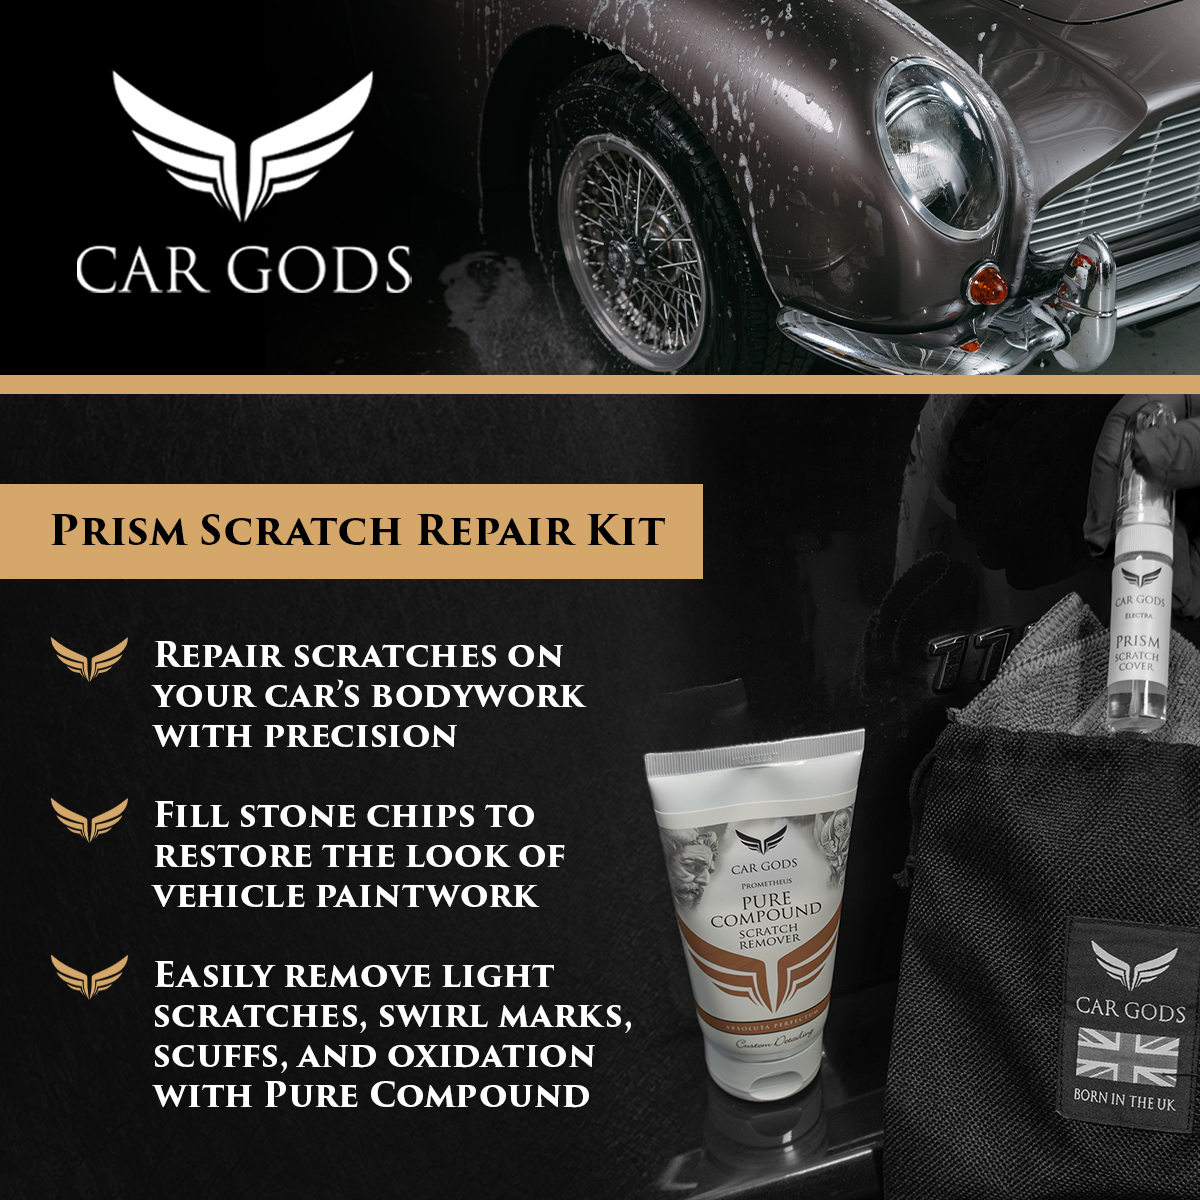 Car Gods Prism Scratch Repair Kit. Repair scratches, fill stone chips and remove swirl marks, scuffs, and oxidation to restore your vehicle’s gloss paintwork finish to its original showroom shine.